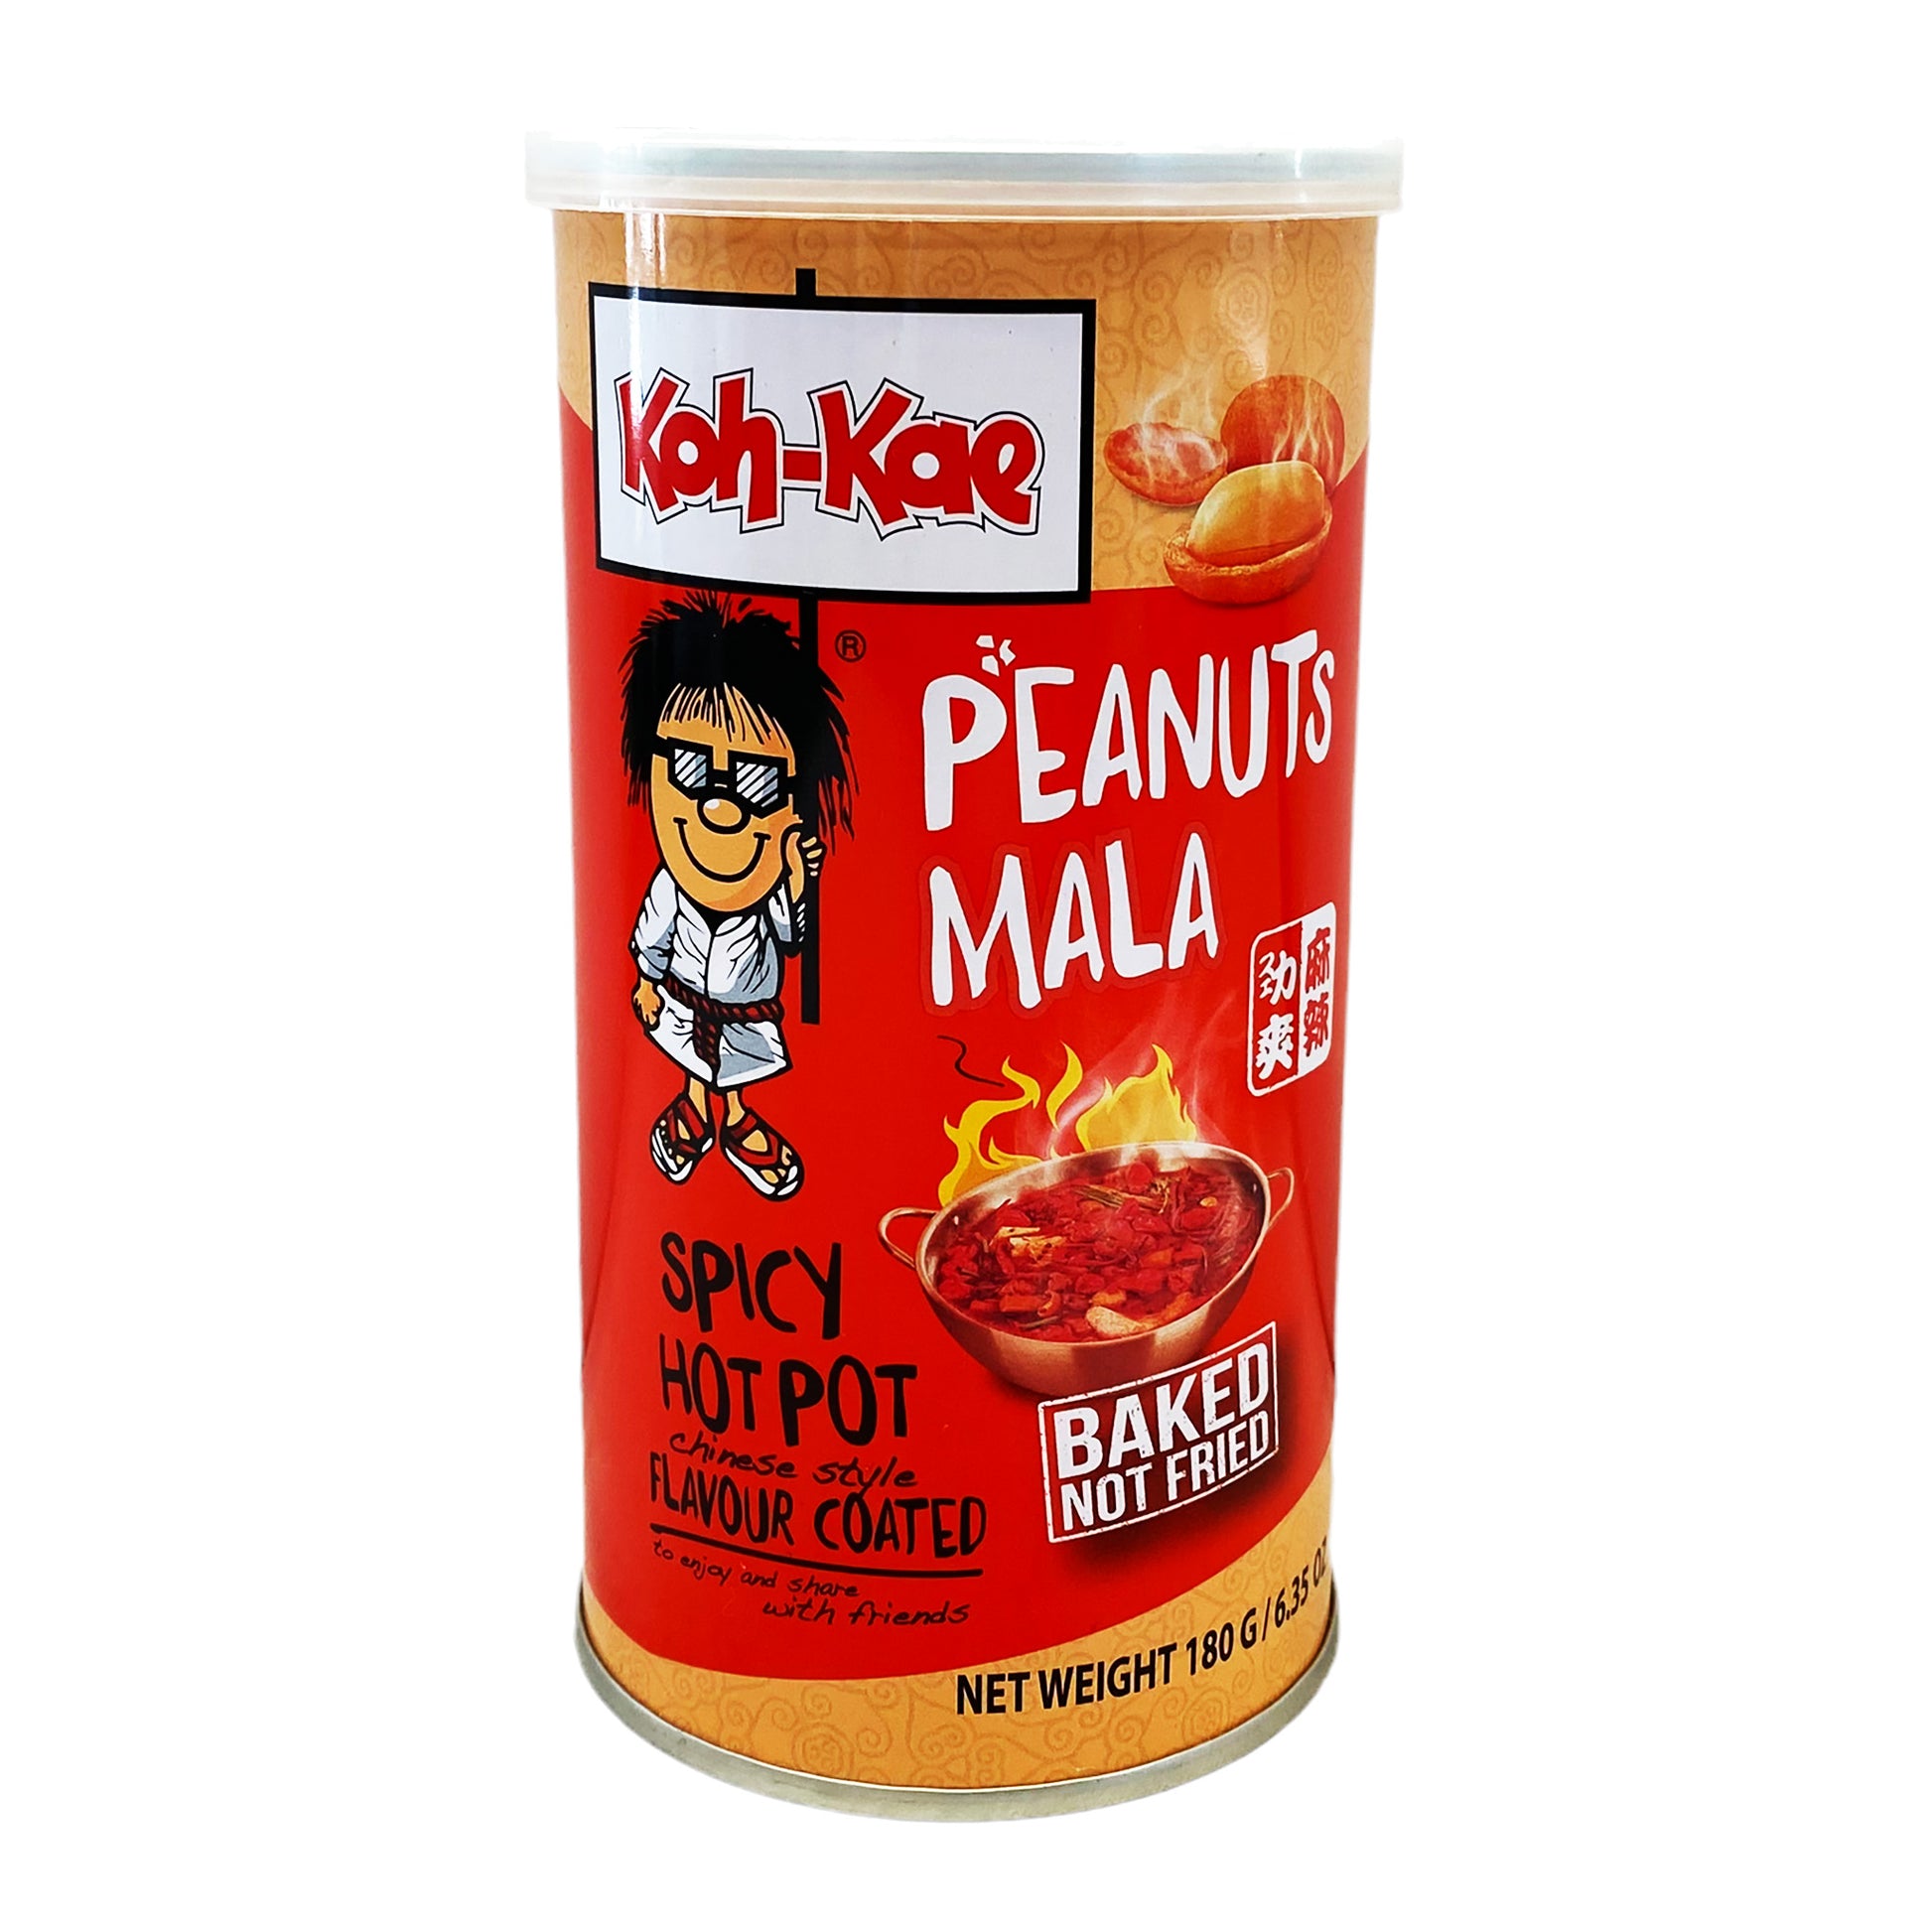 Front graphic image of Koh-Kae Mala Spicy Hot Pot Flavor Coated Peanuts 6.35oz (180g)